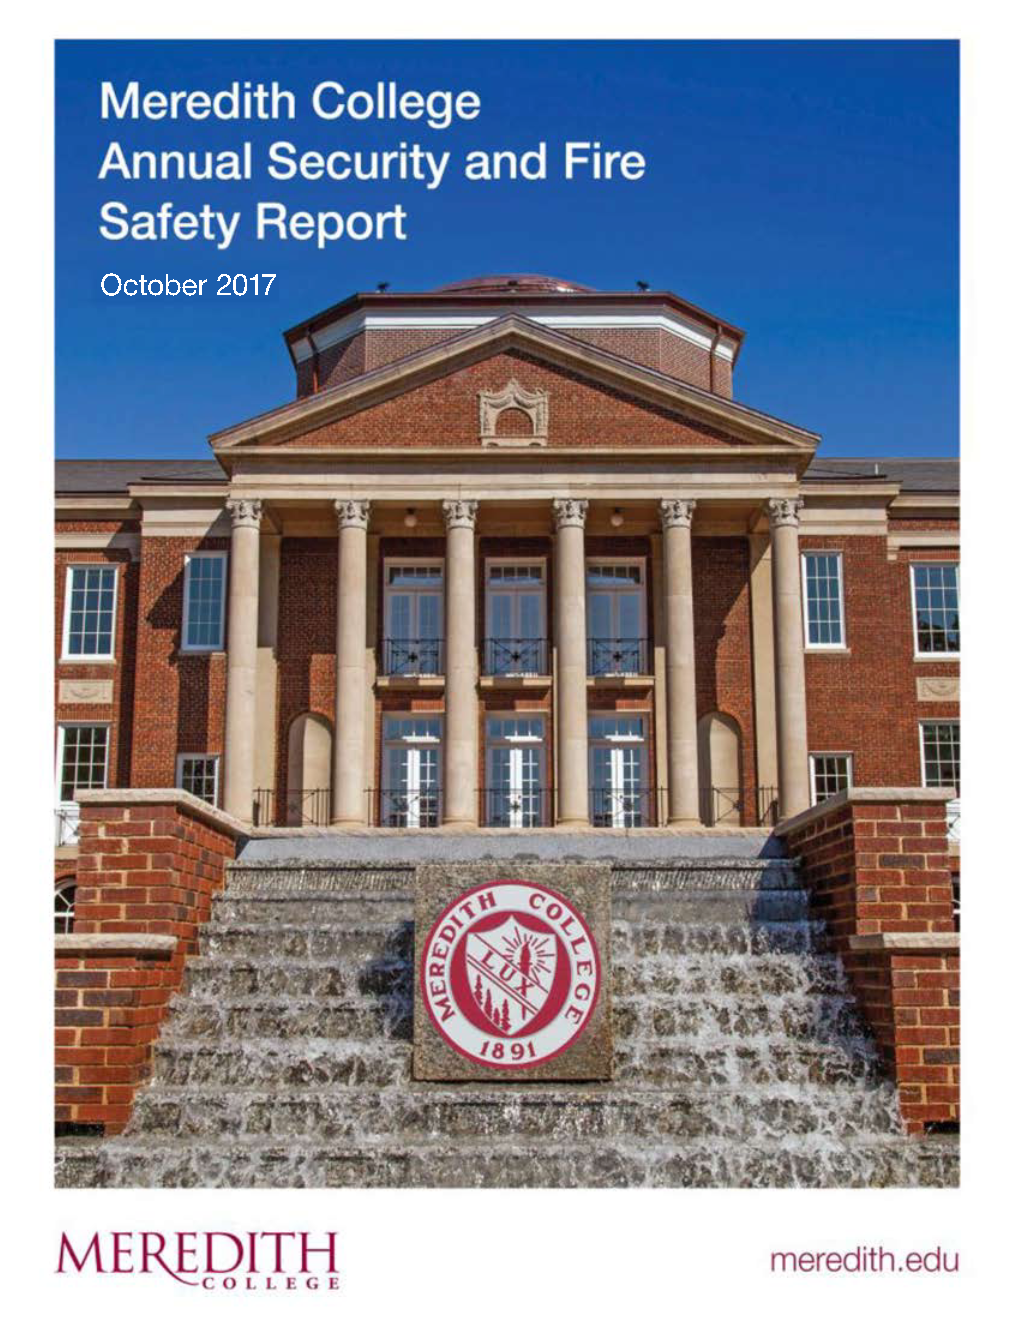 Meredith College Annual Security and Fire Safety Report 2016